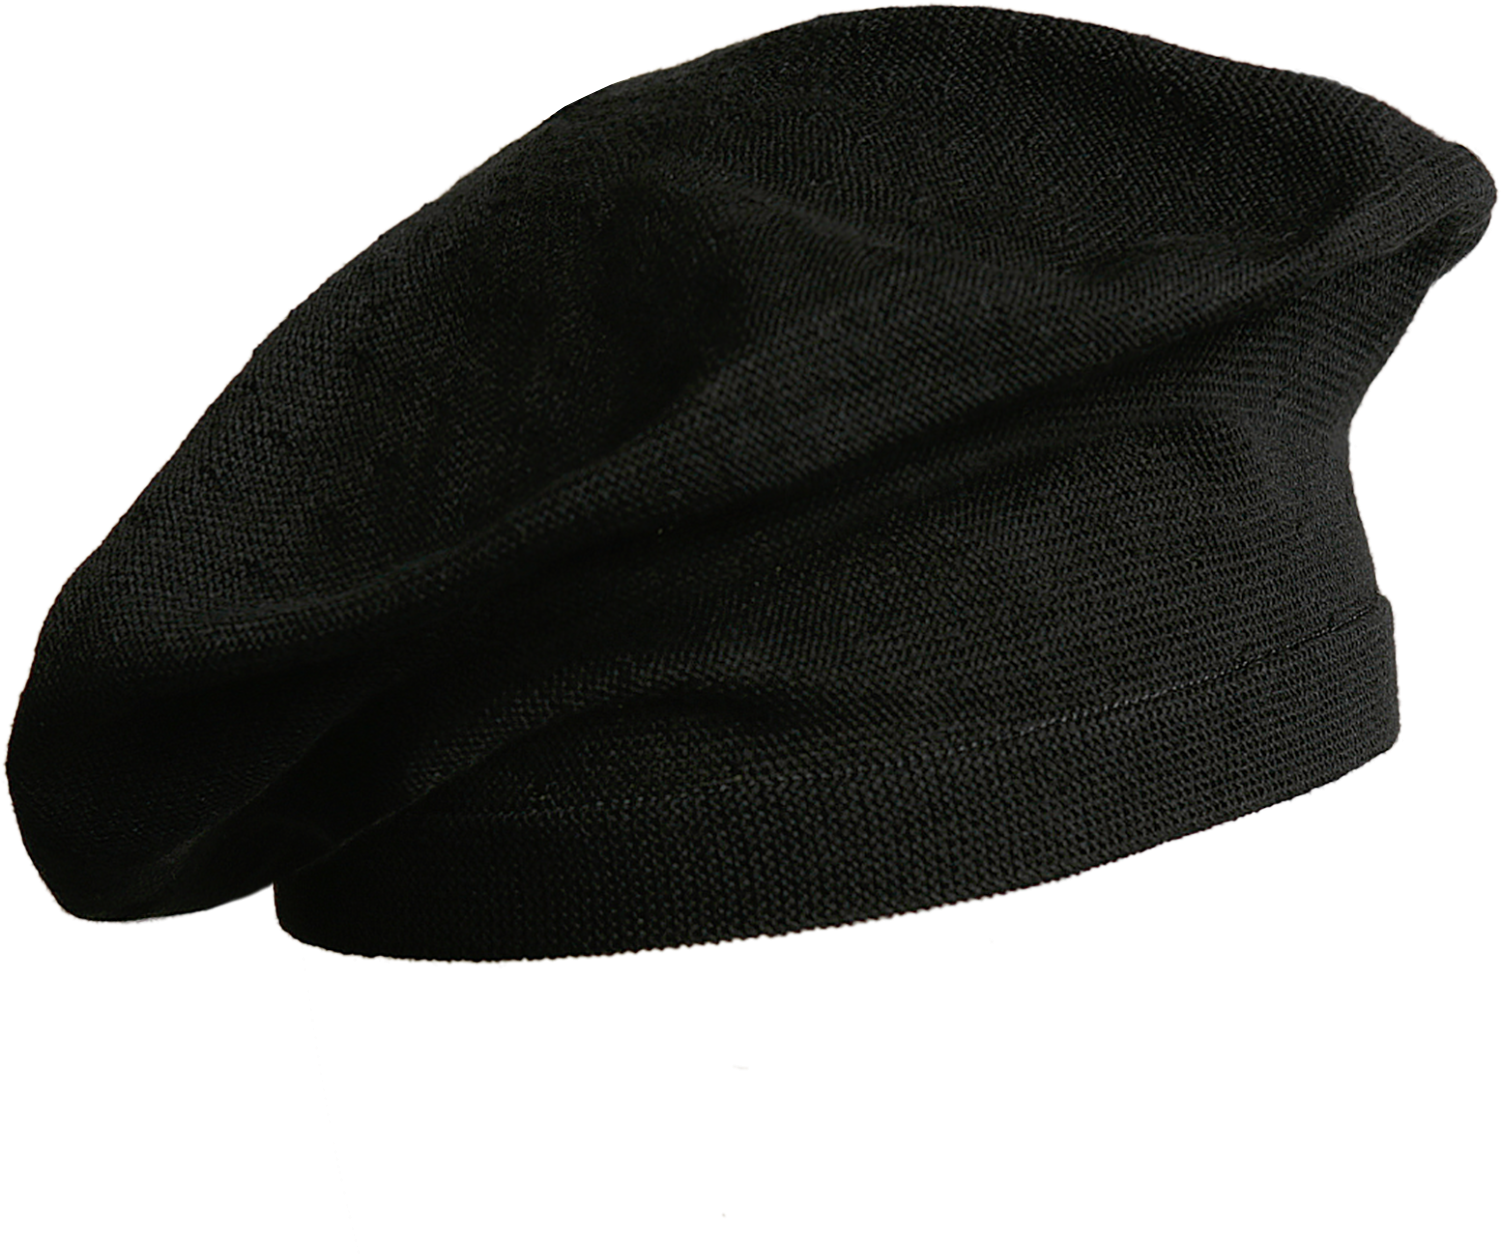 French Hat Png Images Pluspng Pngpluspngcom - French Hat Png Images Pluspng Pngpluspngcom (1500x1500)